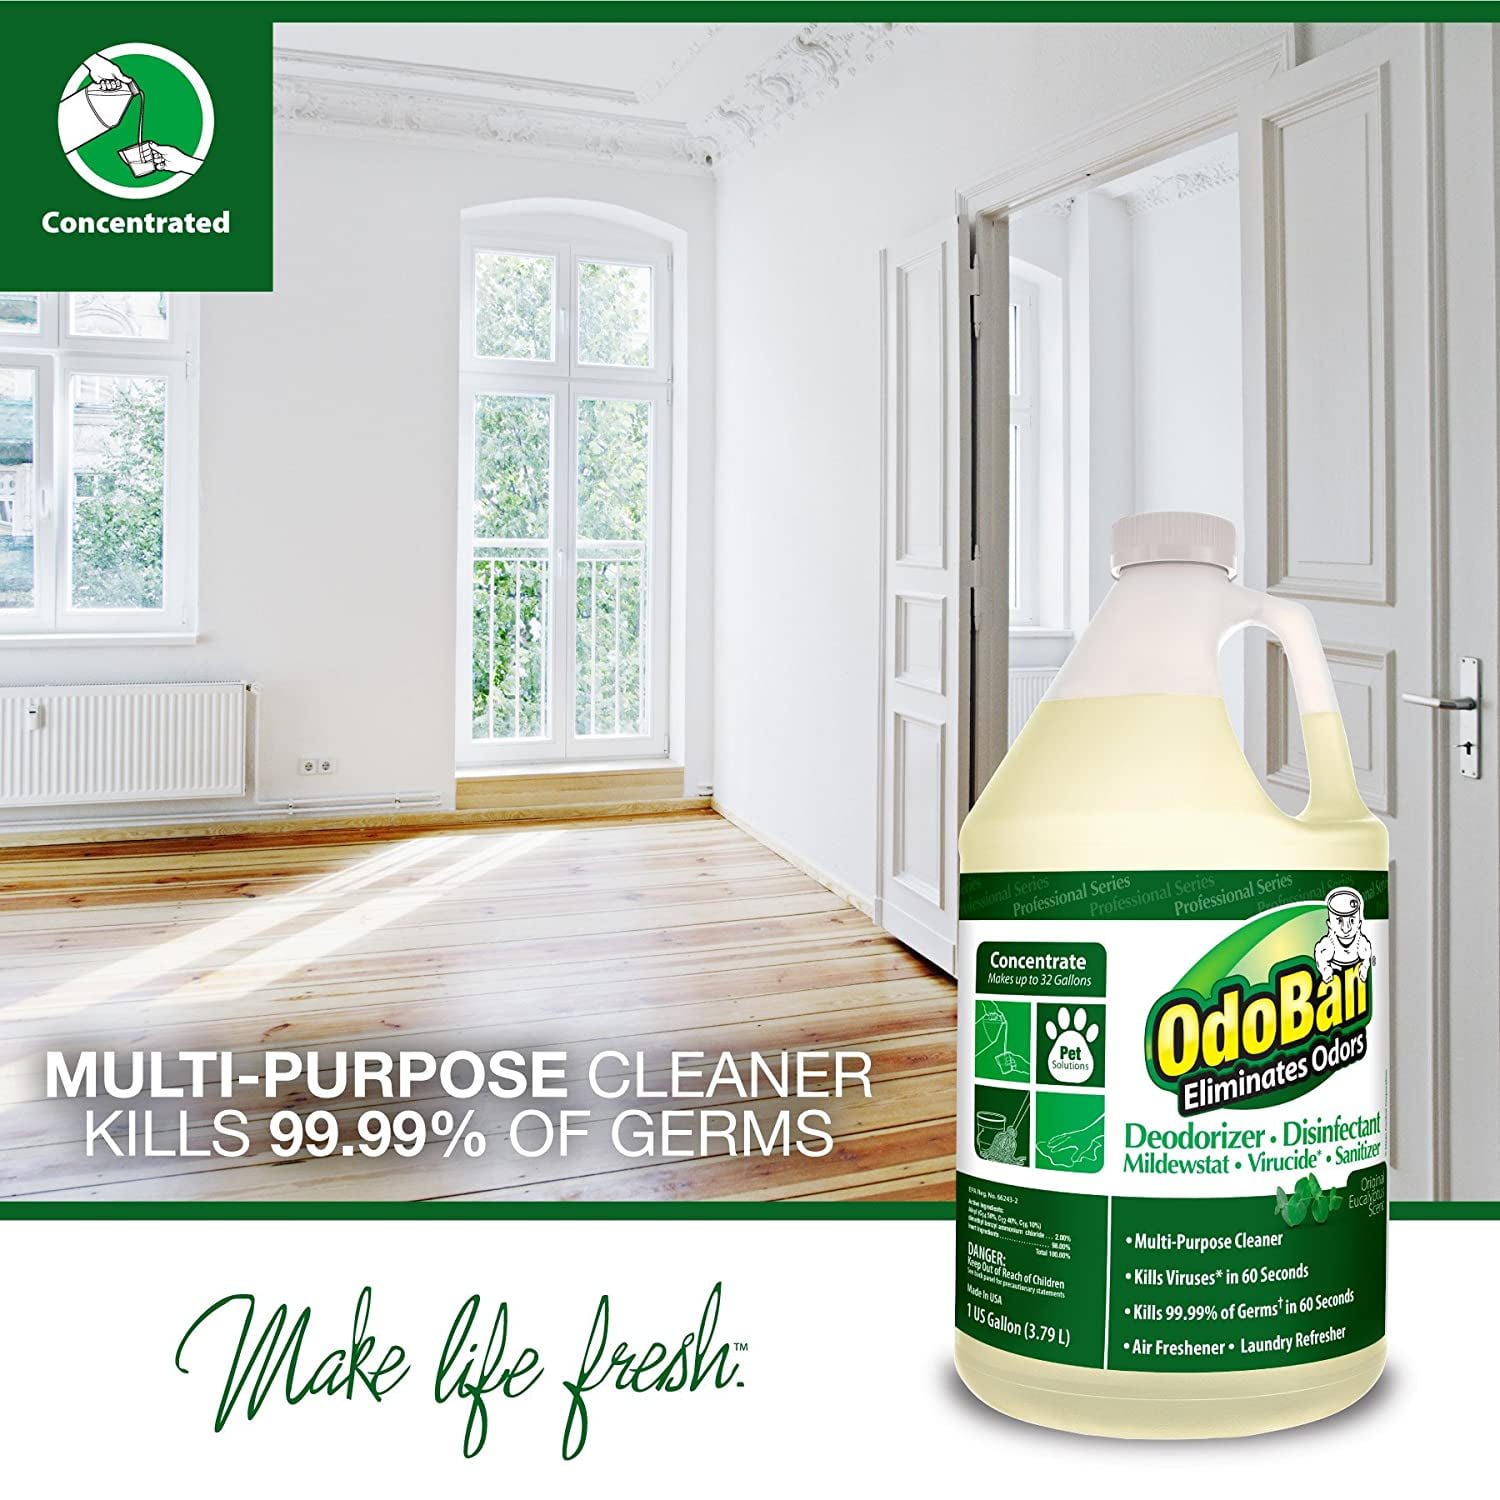 Odoban Professional Cleaning And Odor, Odoban On Laminate Floors